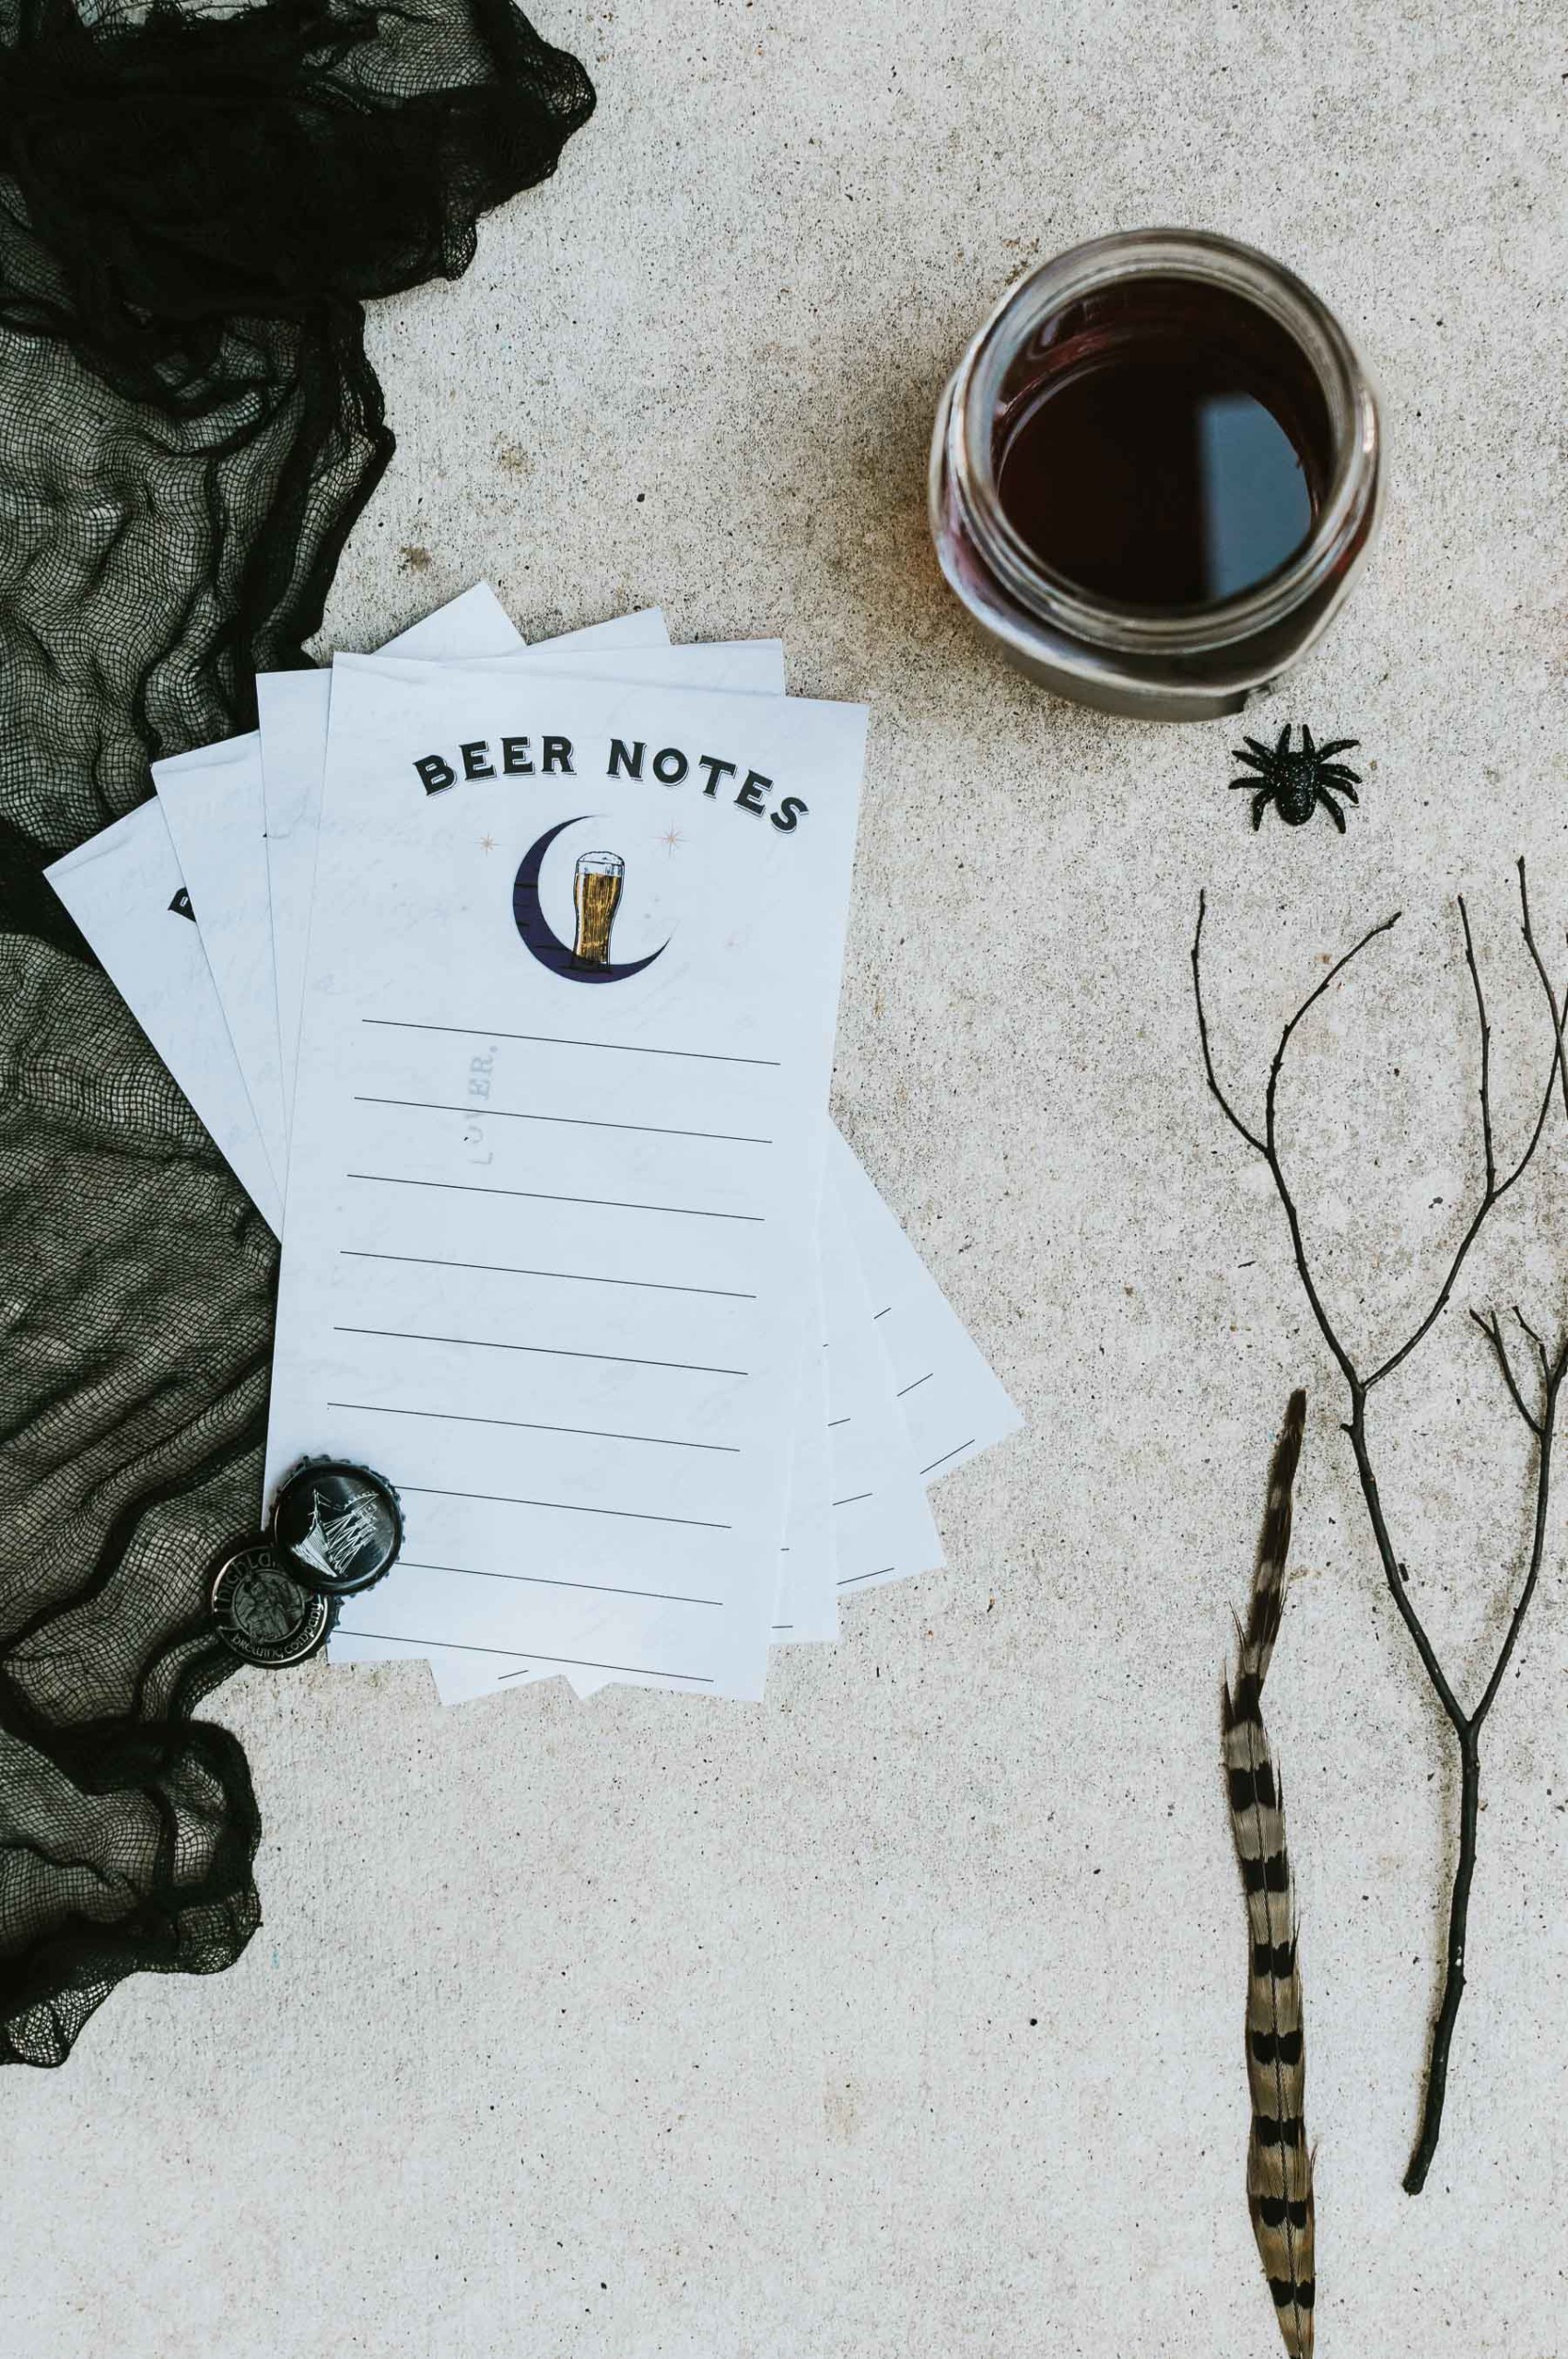 Halloween Themed Beer Tasting Invitations | Beer Tasting Sheets | Designed by Nicole Victory Design